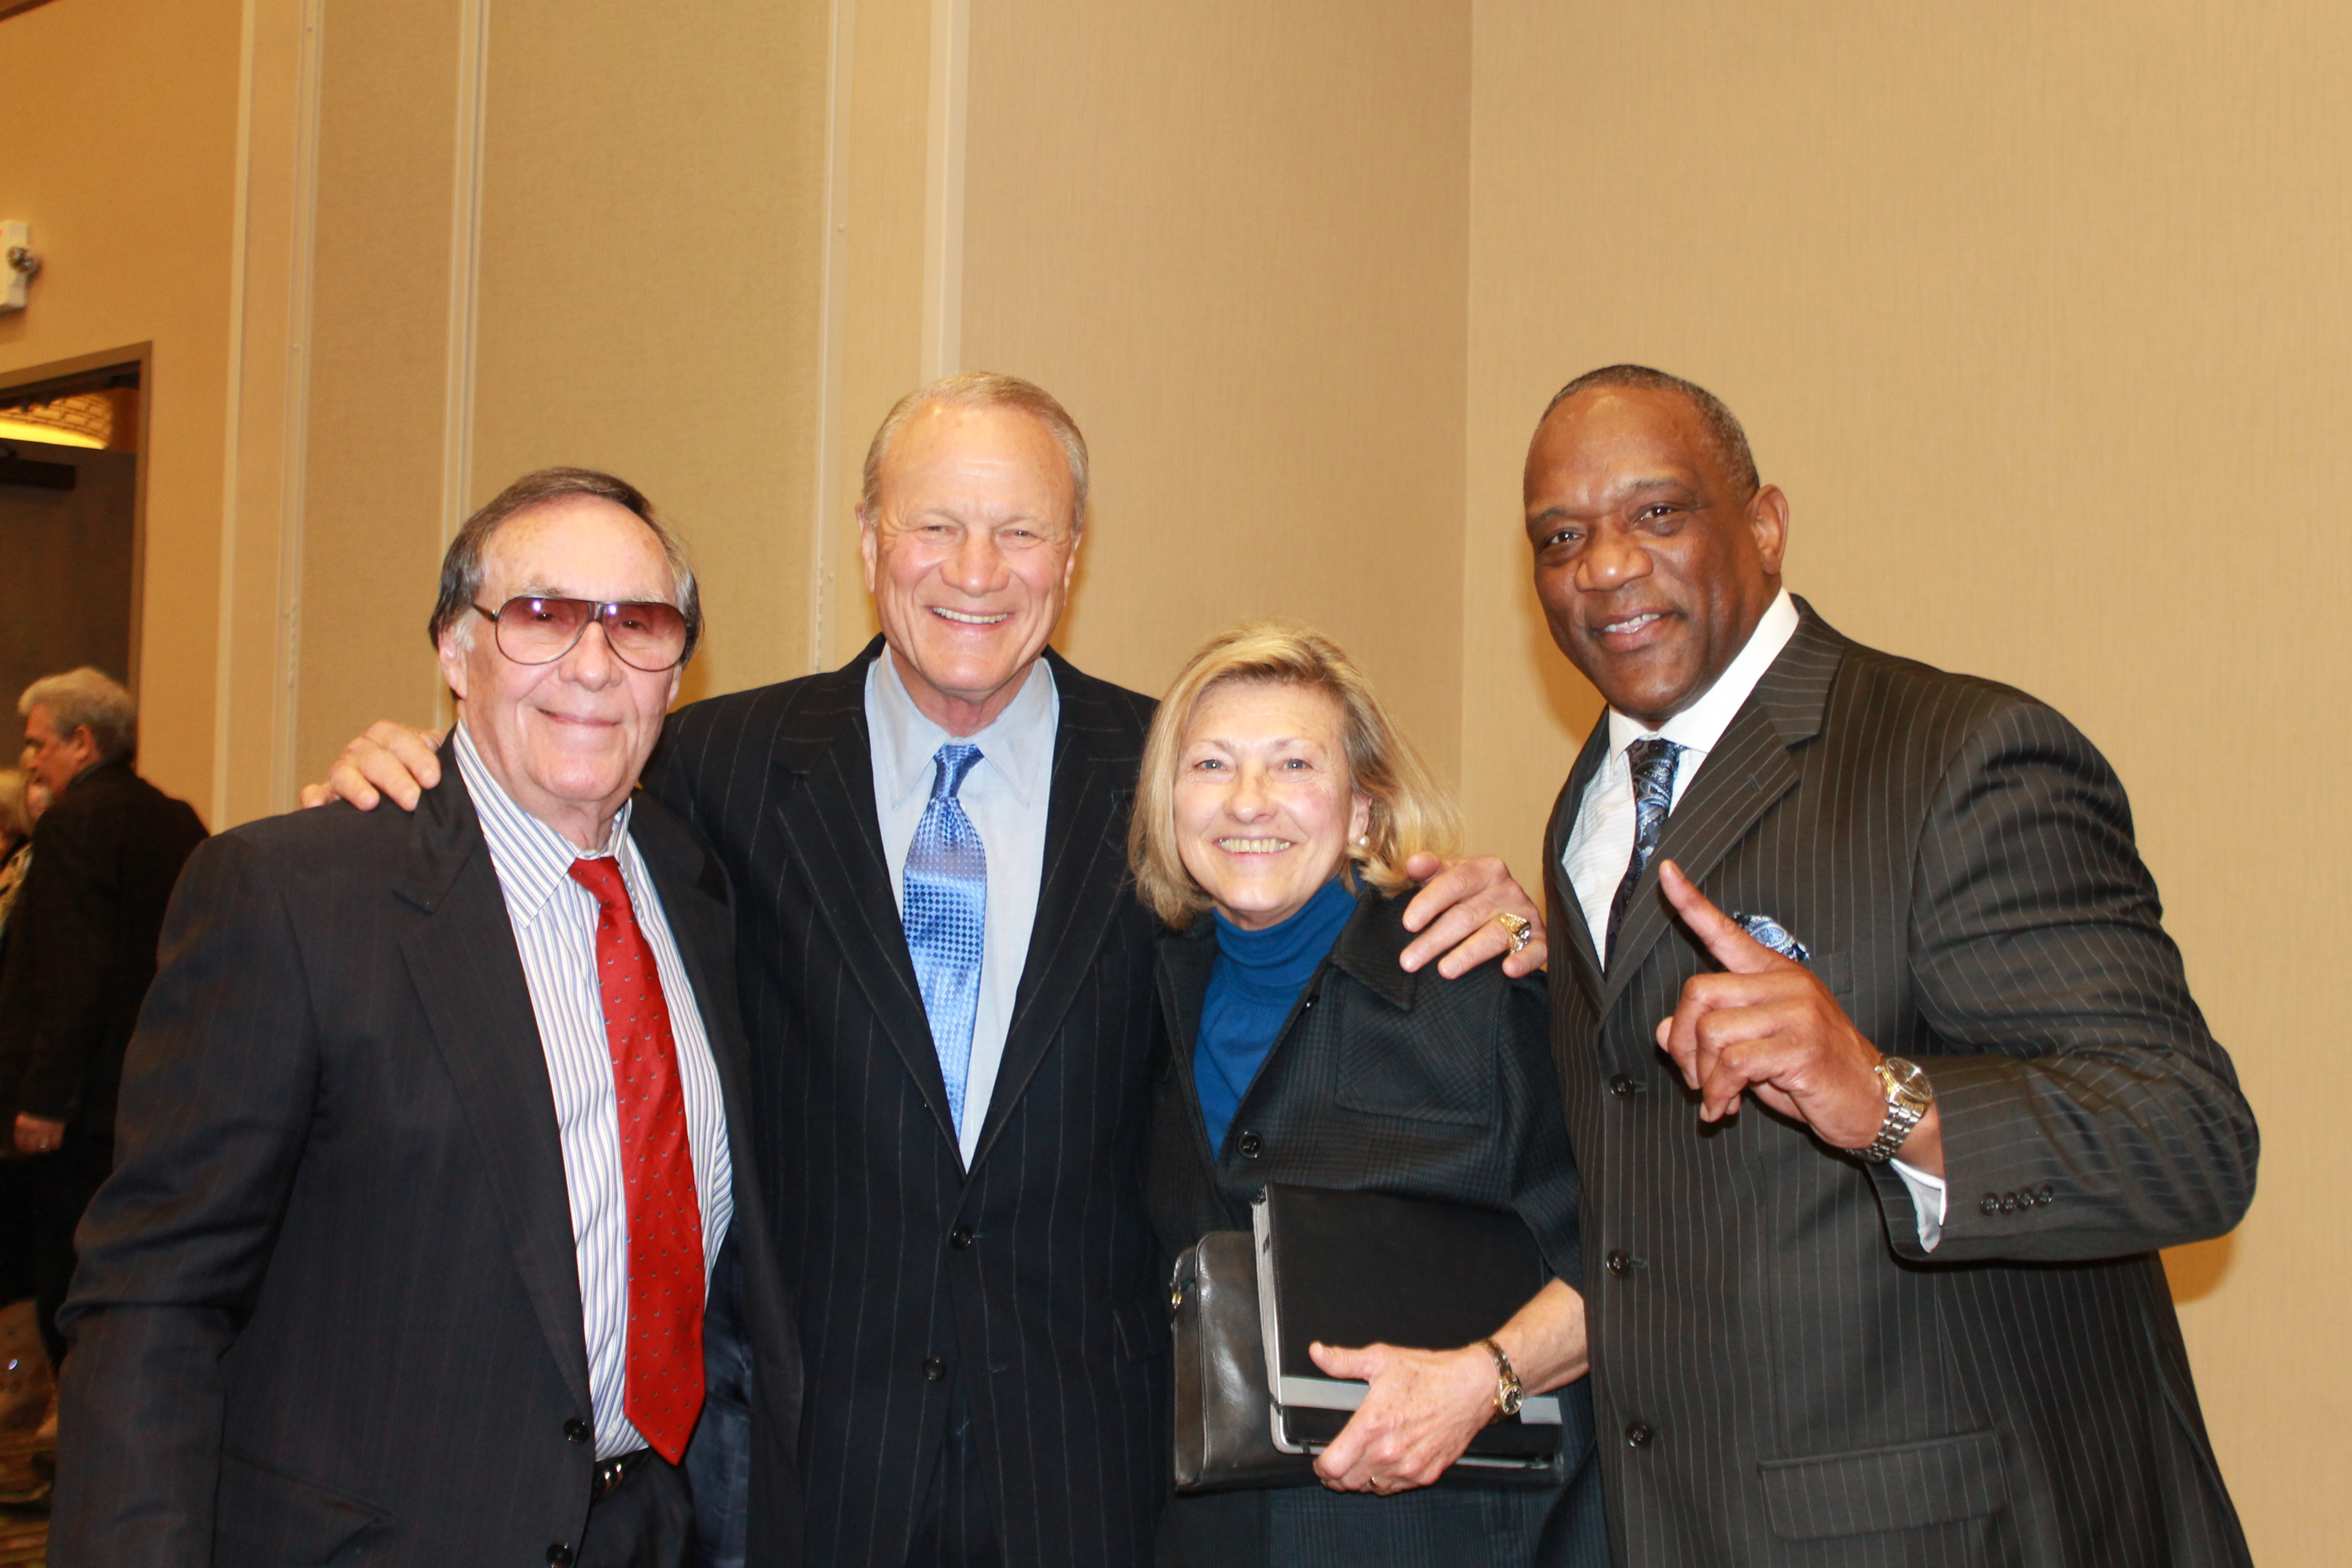 Special Guests Coach Barry Switzer and Billy Sims with Mr. & Mrs. Bob White